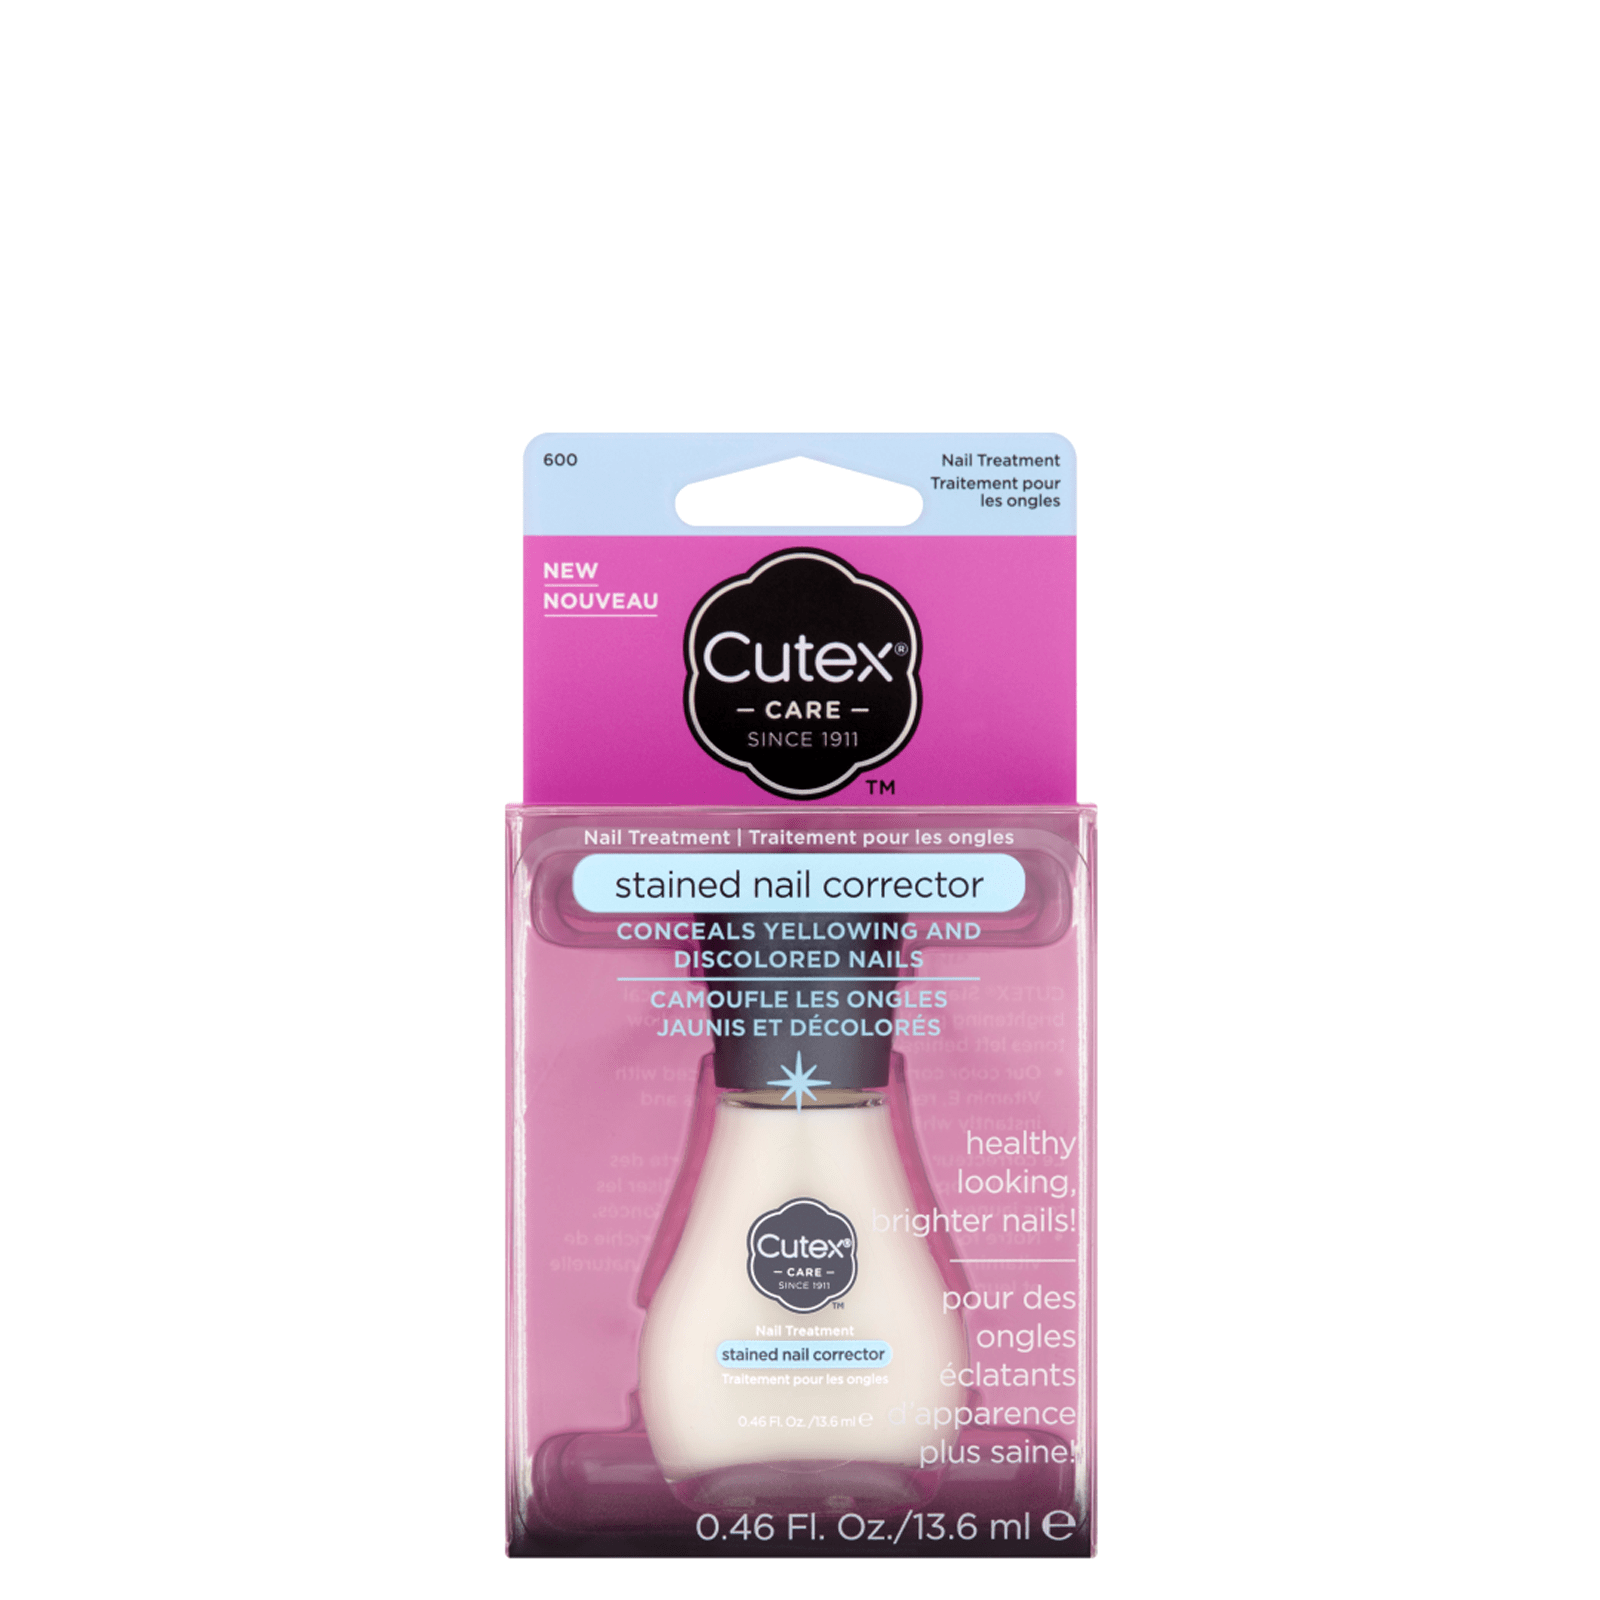 Cutex Stained Nail Corrector 13.6ml